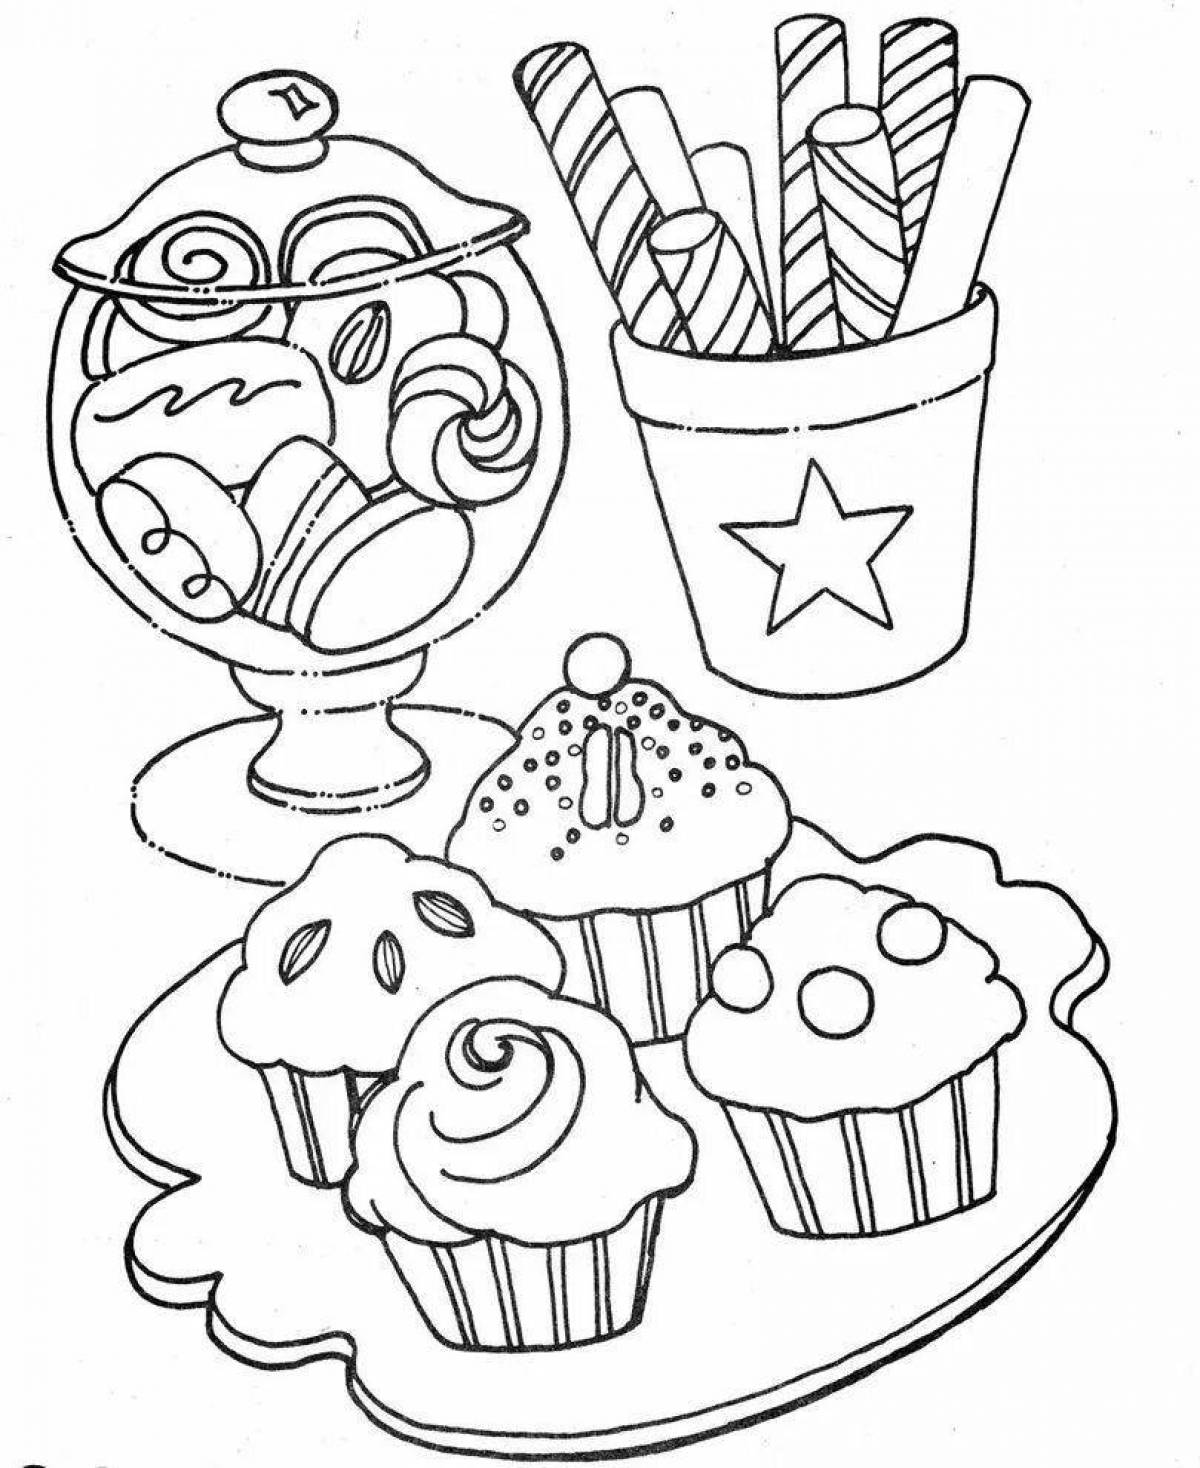 Exquisite coloring book for girls 10 years cute food